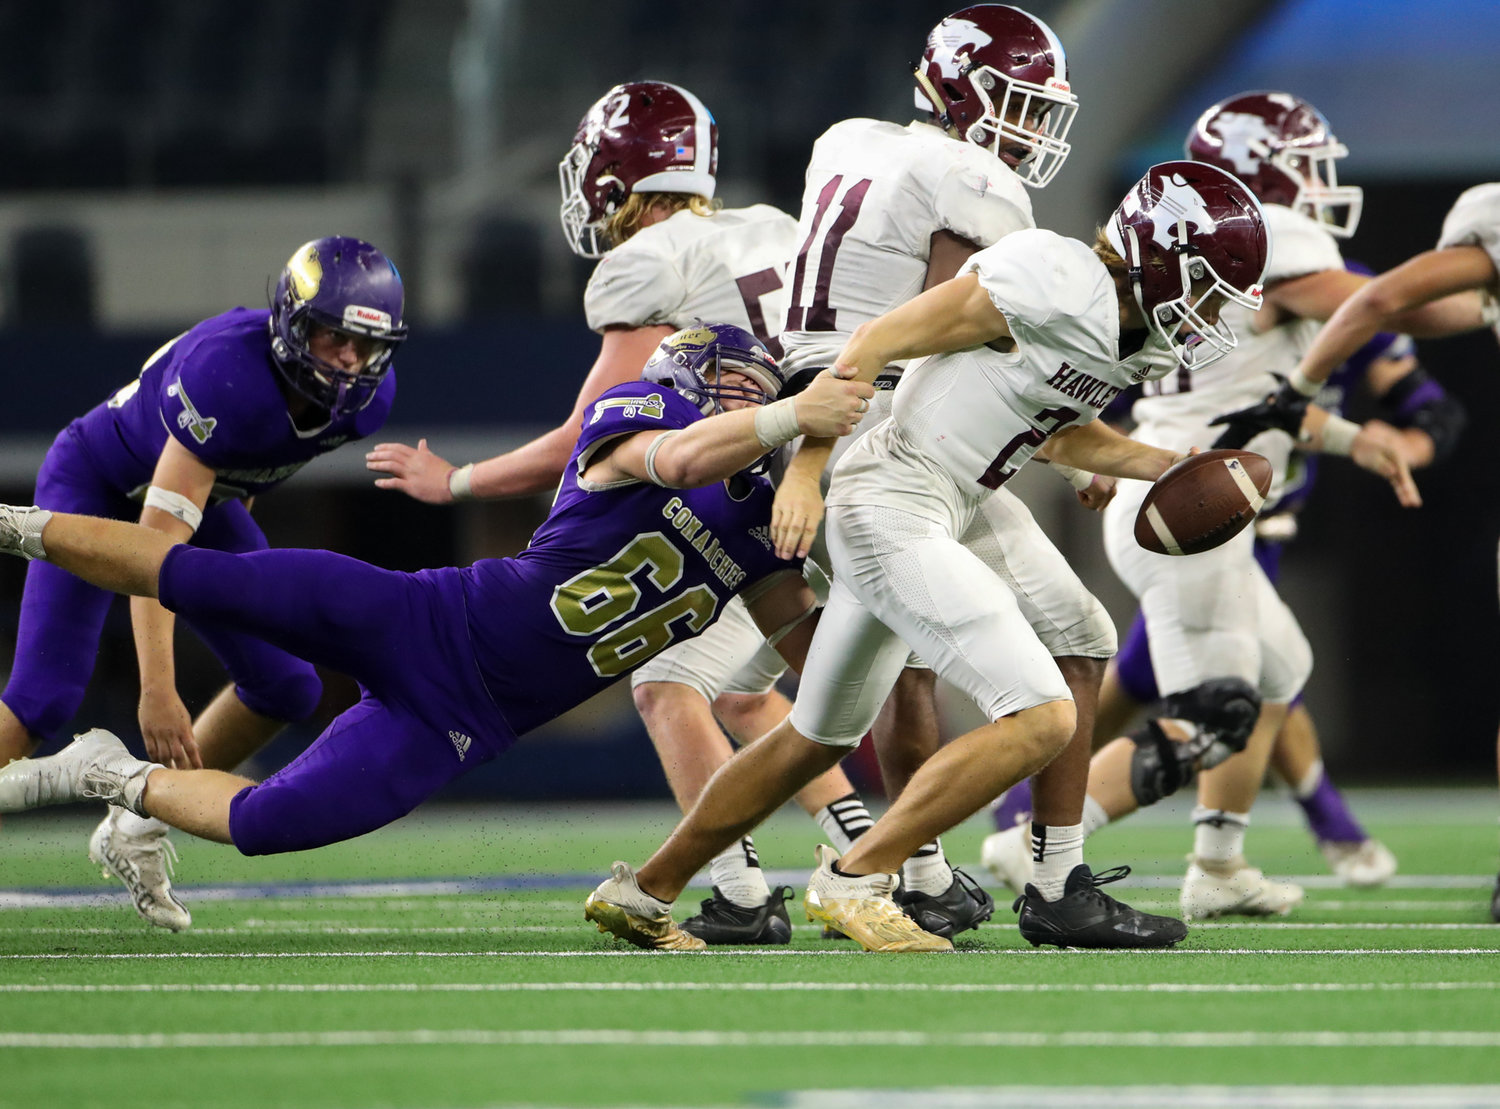 Shiner Comanches junior Dalton Patton (66) grabs onto Hawley Bearcats junior Rodey Hooper (2) in the backfield during the Class 2A Division I state football championship game between Shiner and Hawley on December 15, 2021 in Arlington, Texas.